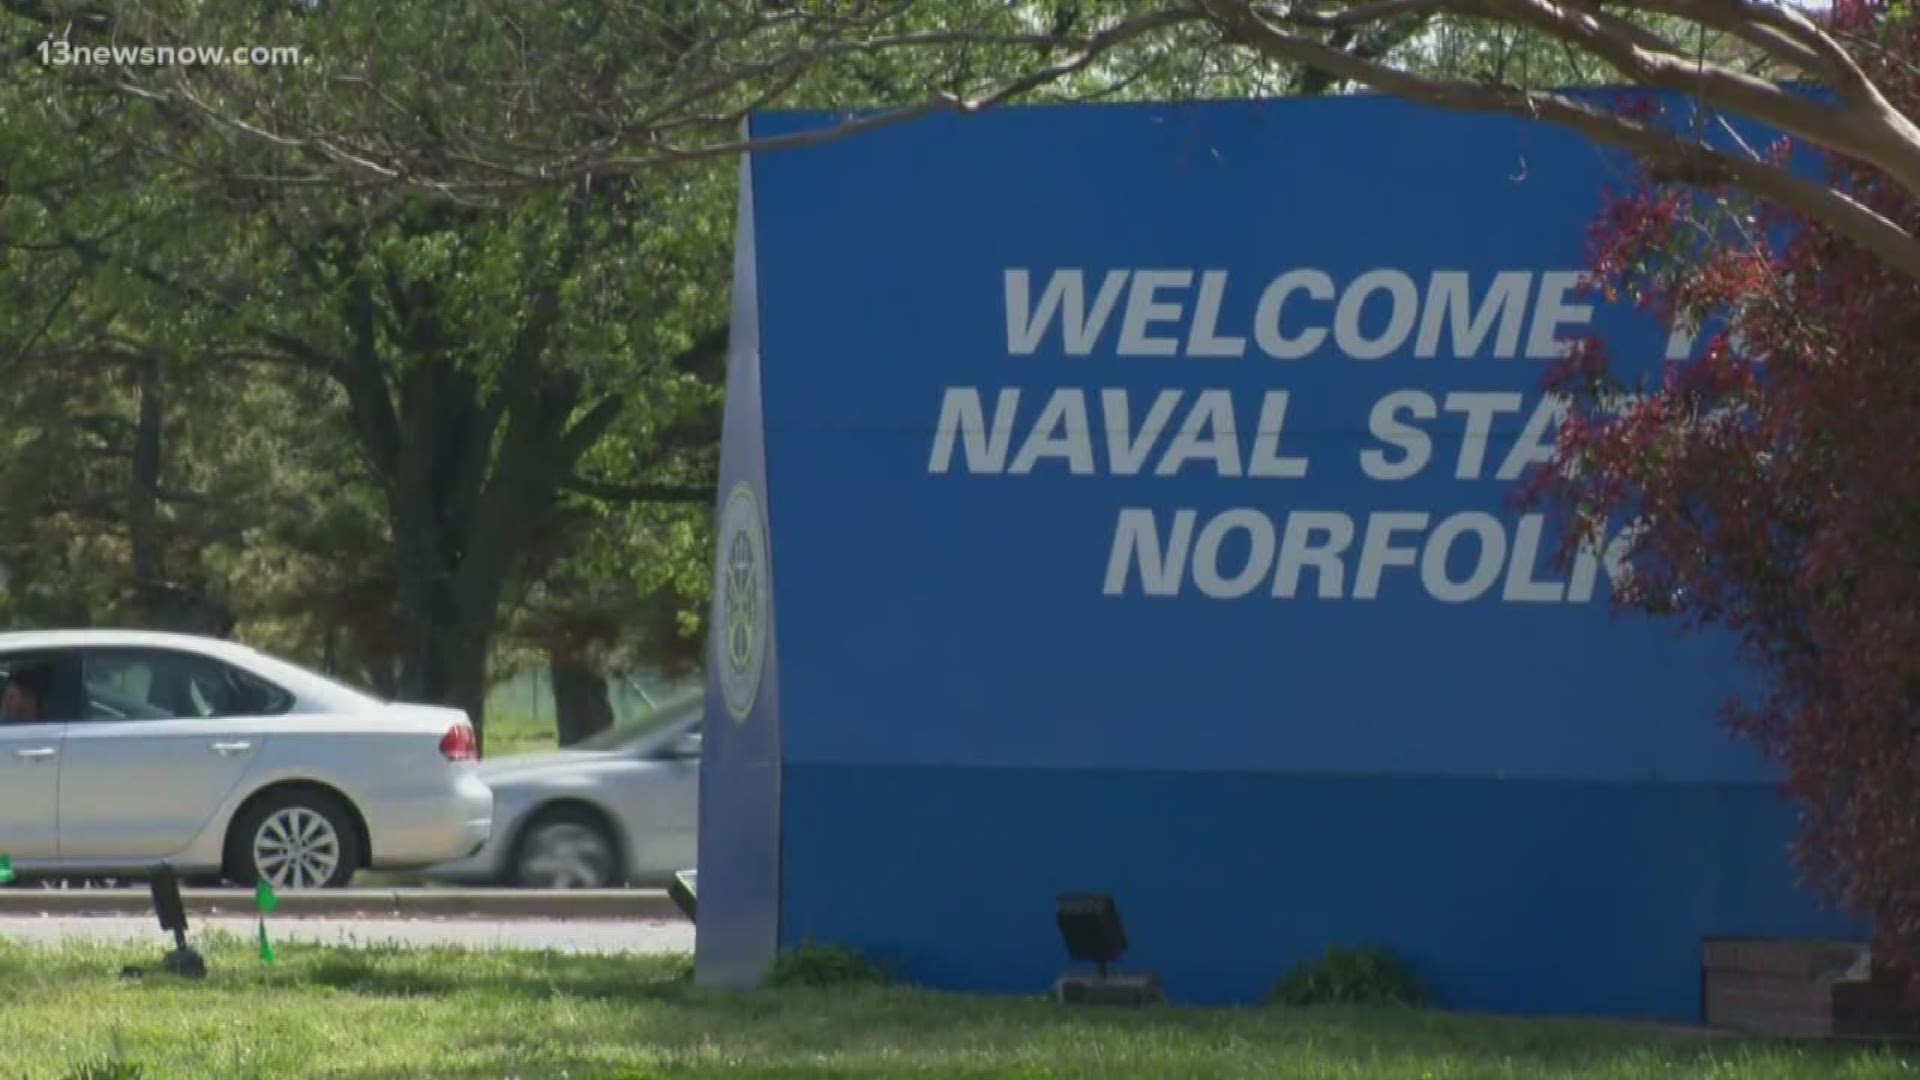 A Navy SEAL Team 6 member is charged with soliciting nude photos of women while pretending to be someone else through text messages.